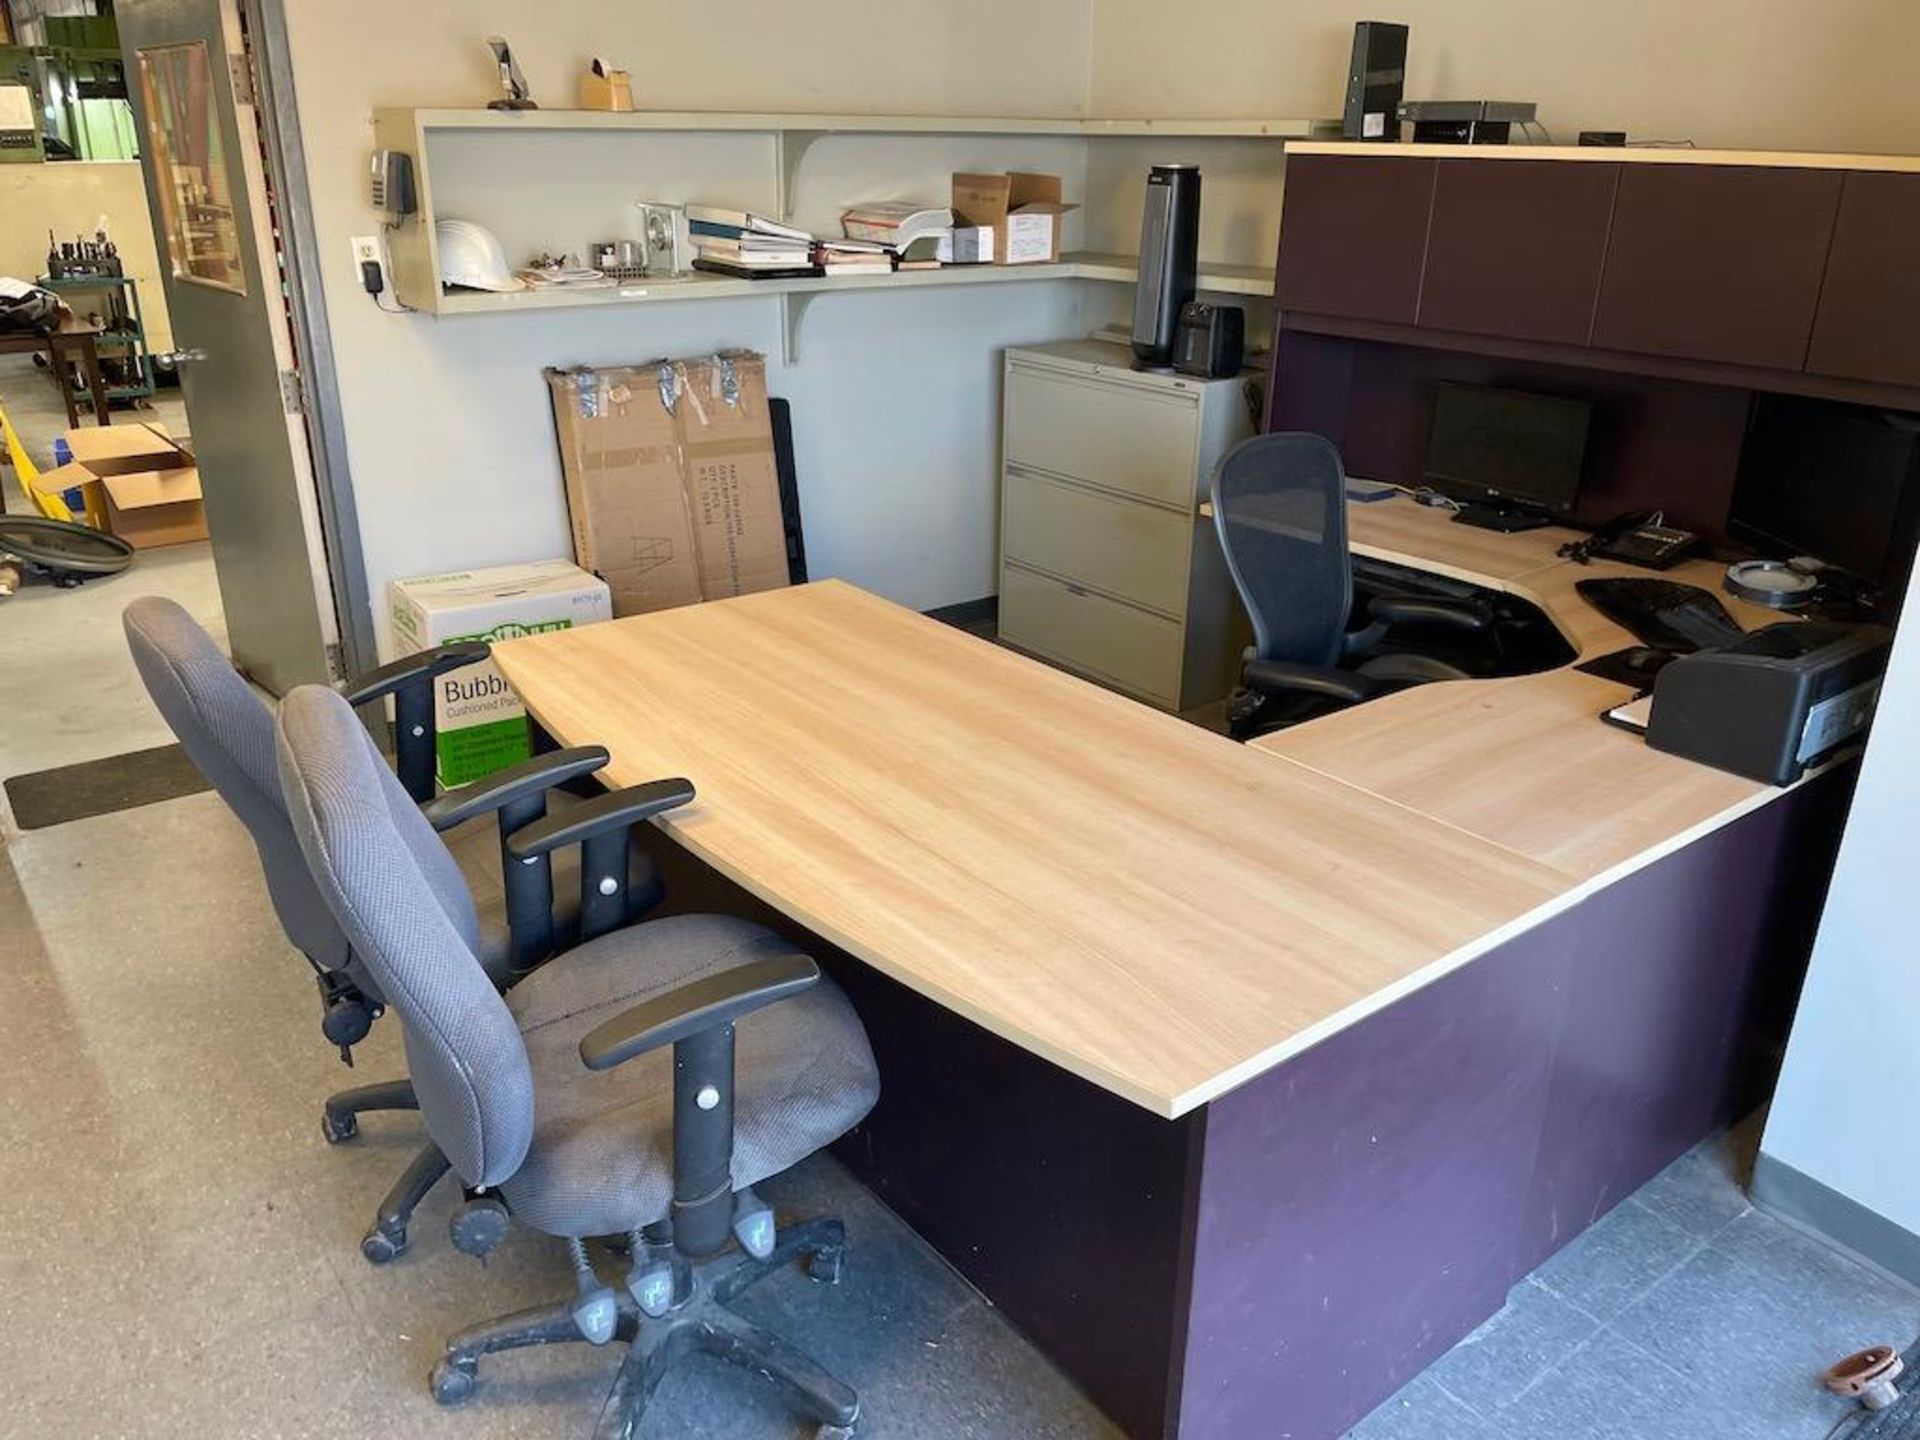 OFFICE W U SHAPED DESK APPROX 104 X 72 IN TOTAL, HUTCH, HERMAN MILLER AERON CHAIR, 2 OFFICE ARM CHAI - Image 4 of 8